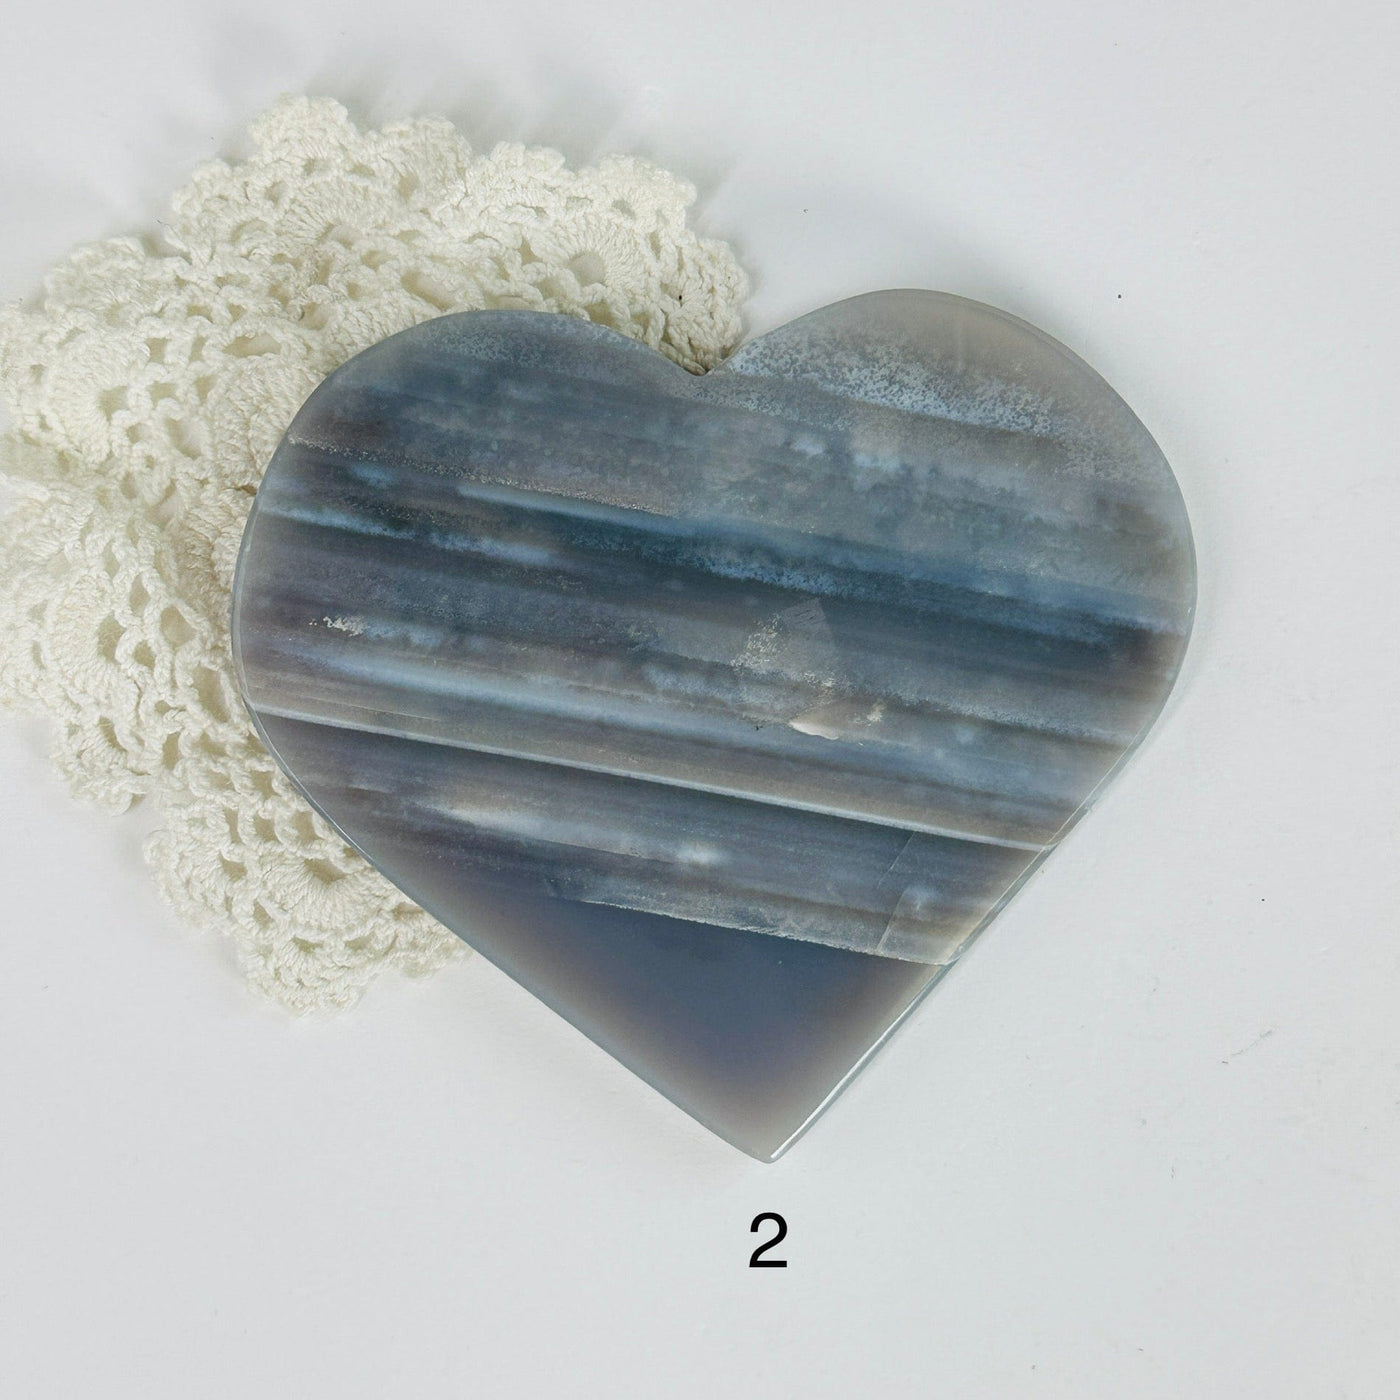 variant 2 of agate heart on white background